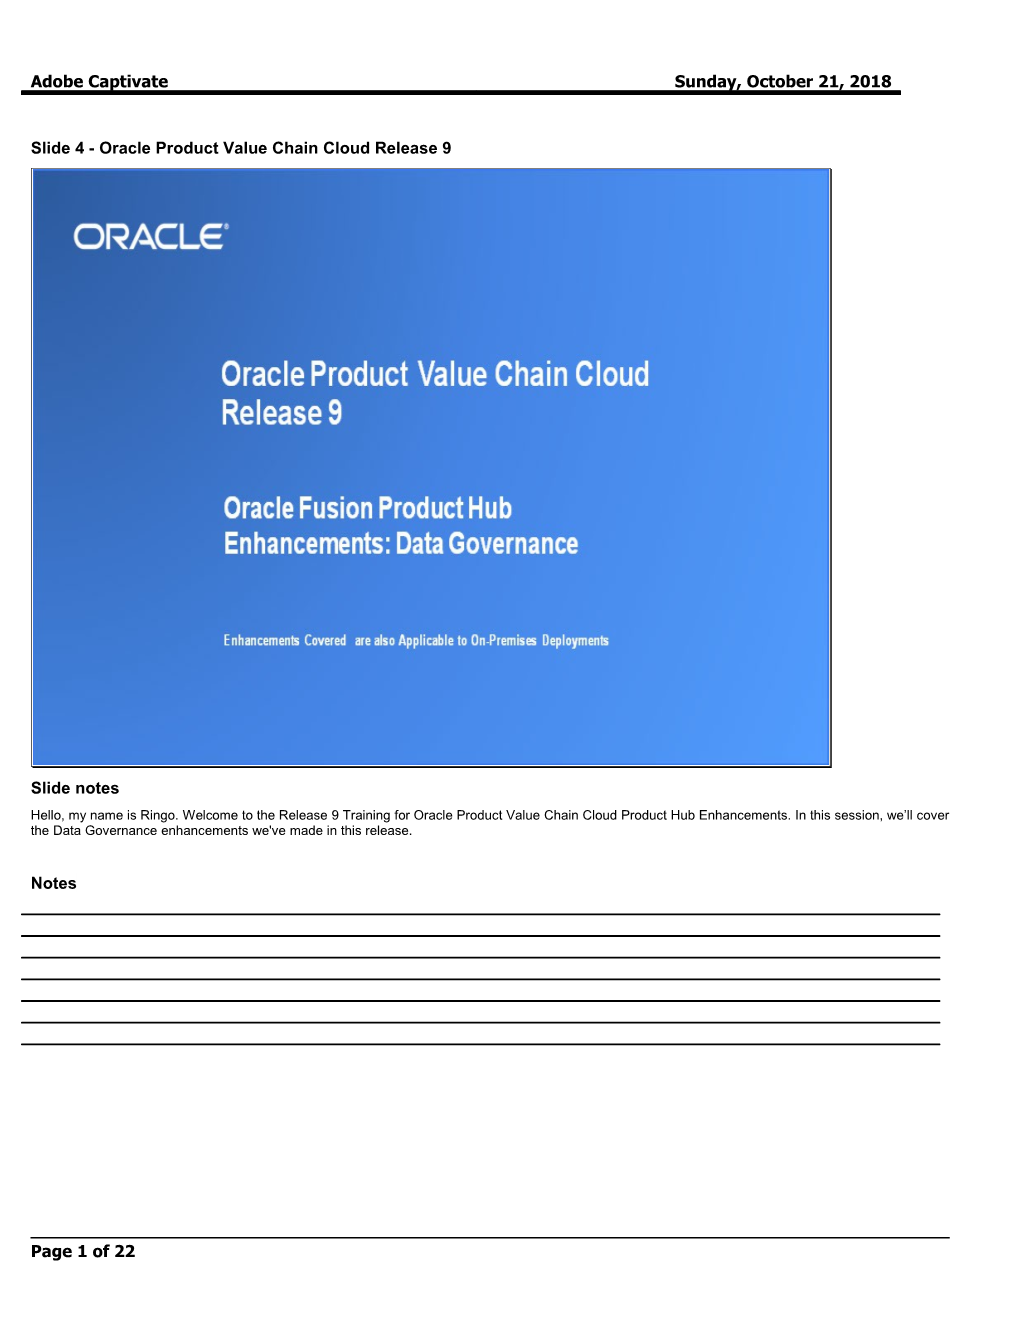 Slide 4 - Oracle Product Value Chain Cloud Release 9